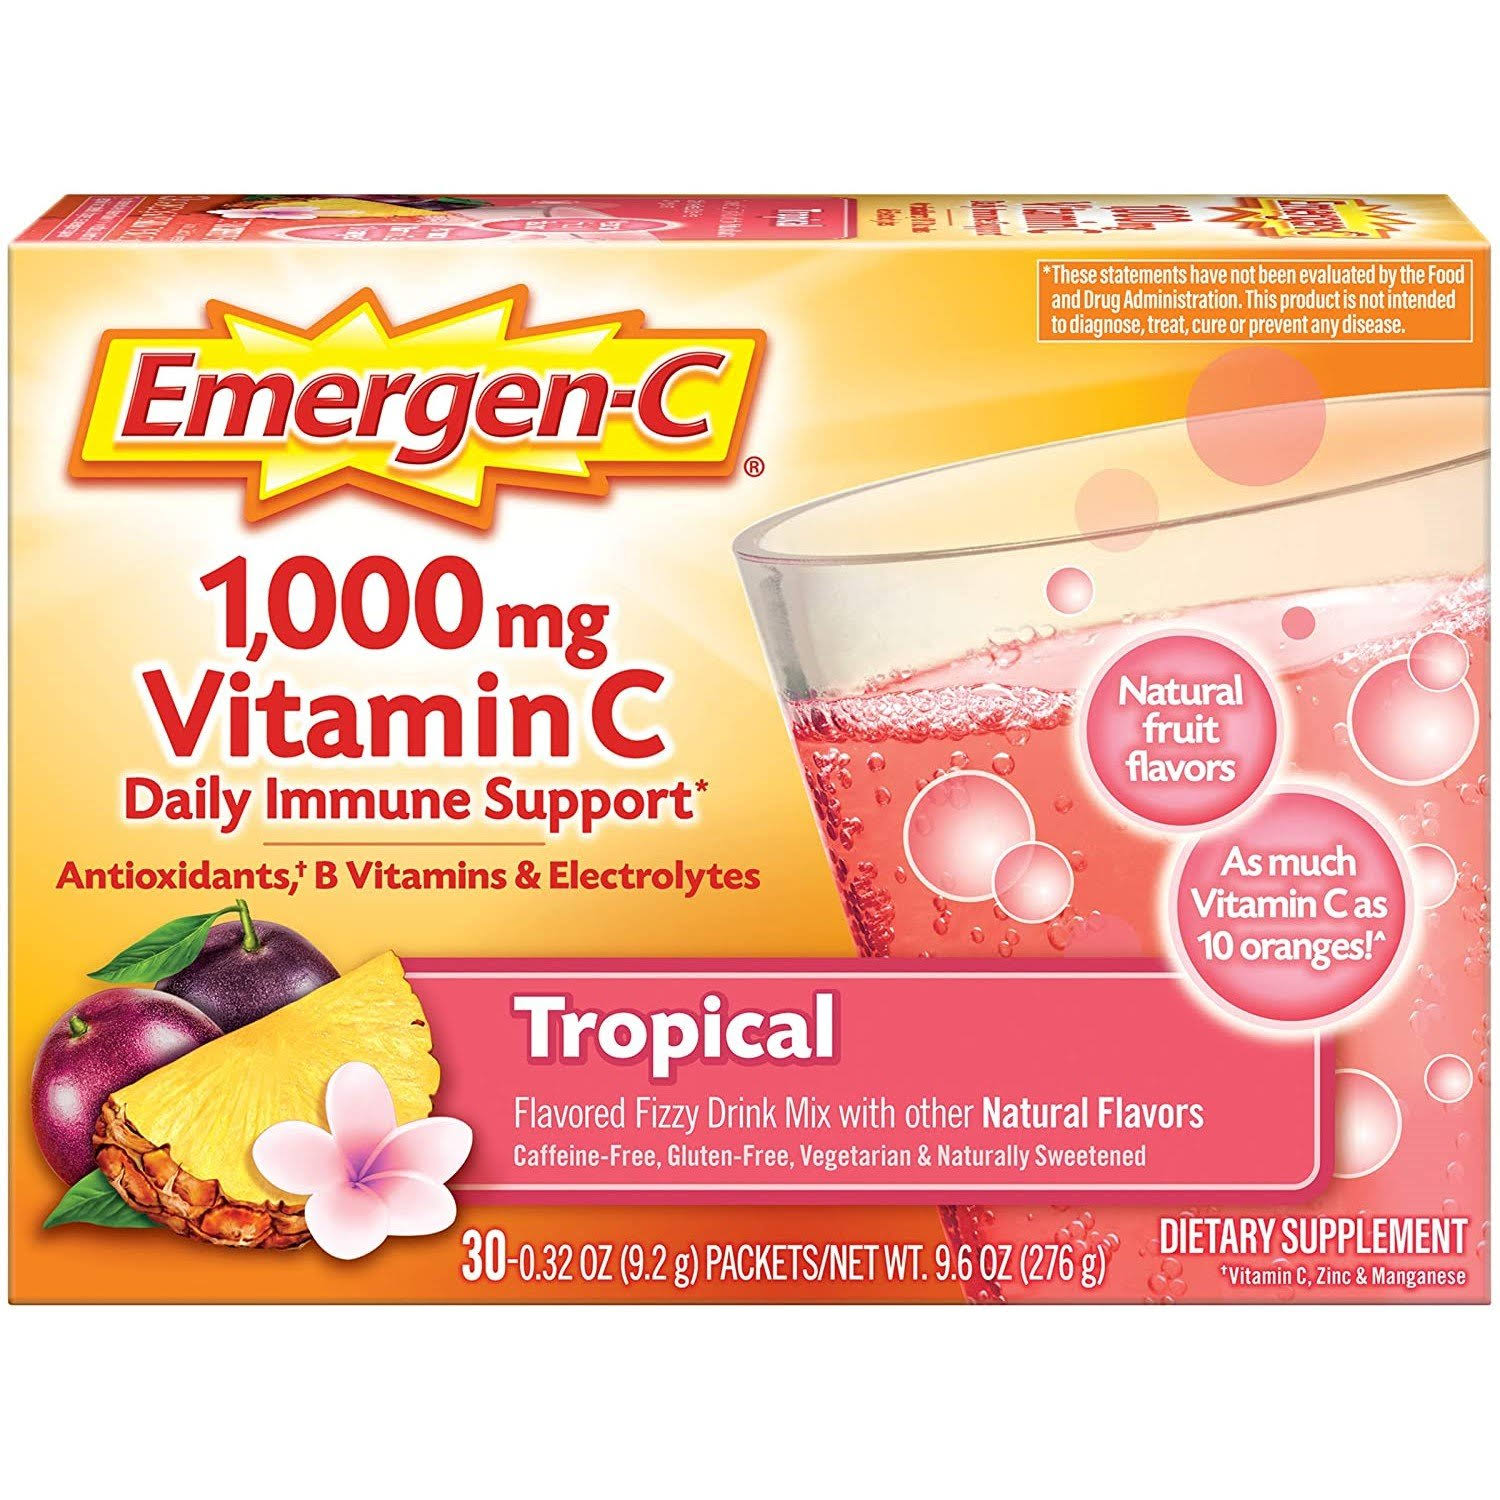 Emergen-C Vitamin C Flavored Fizzy Drink Mix - 1,000 mg, Tropical